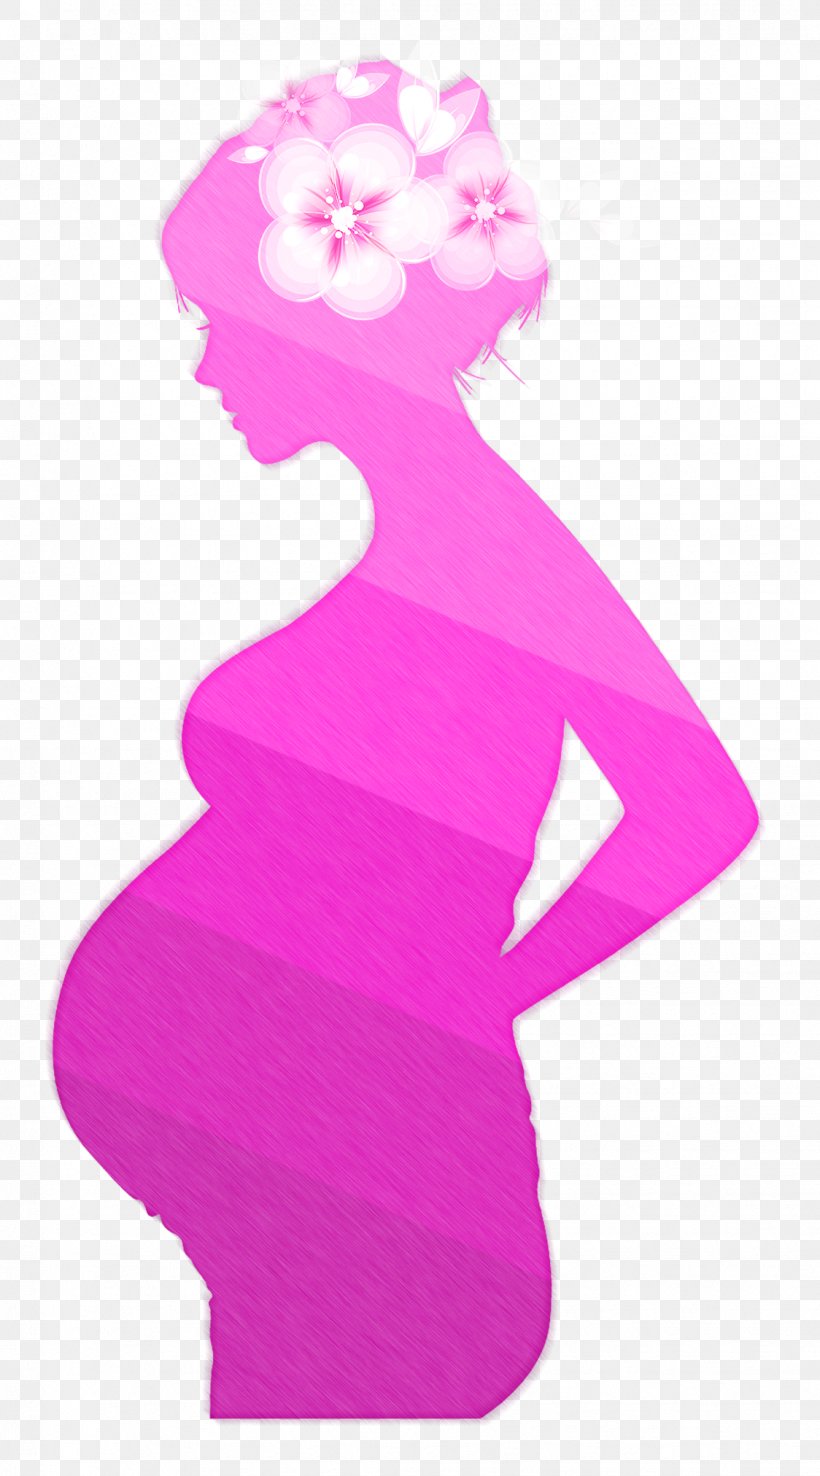 Ectopic Pregnancy Mother Woman, PNG, 1124x2024px, Pregnancy, Child, Ectopic Pregnancy, Etonogestrel, Etonogestrel Birth Control Implant Download Free